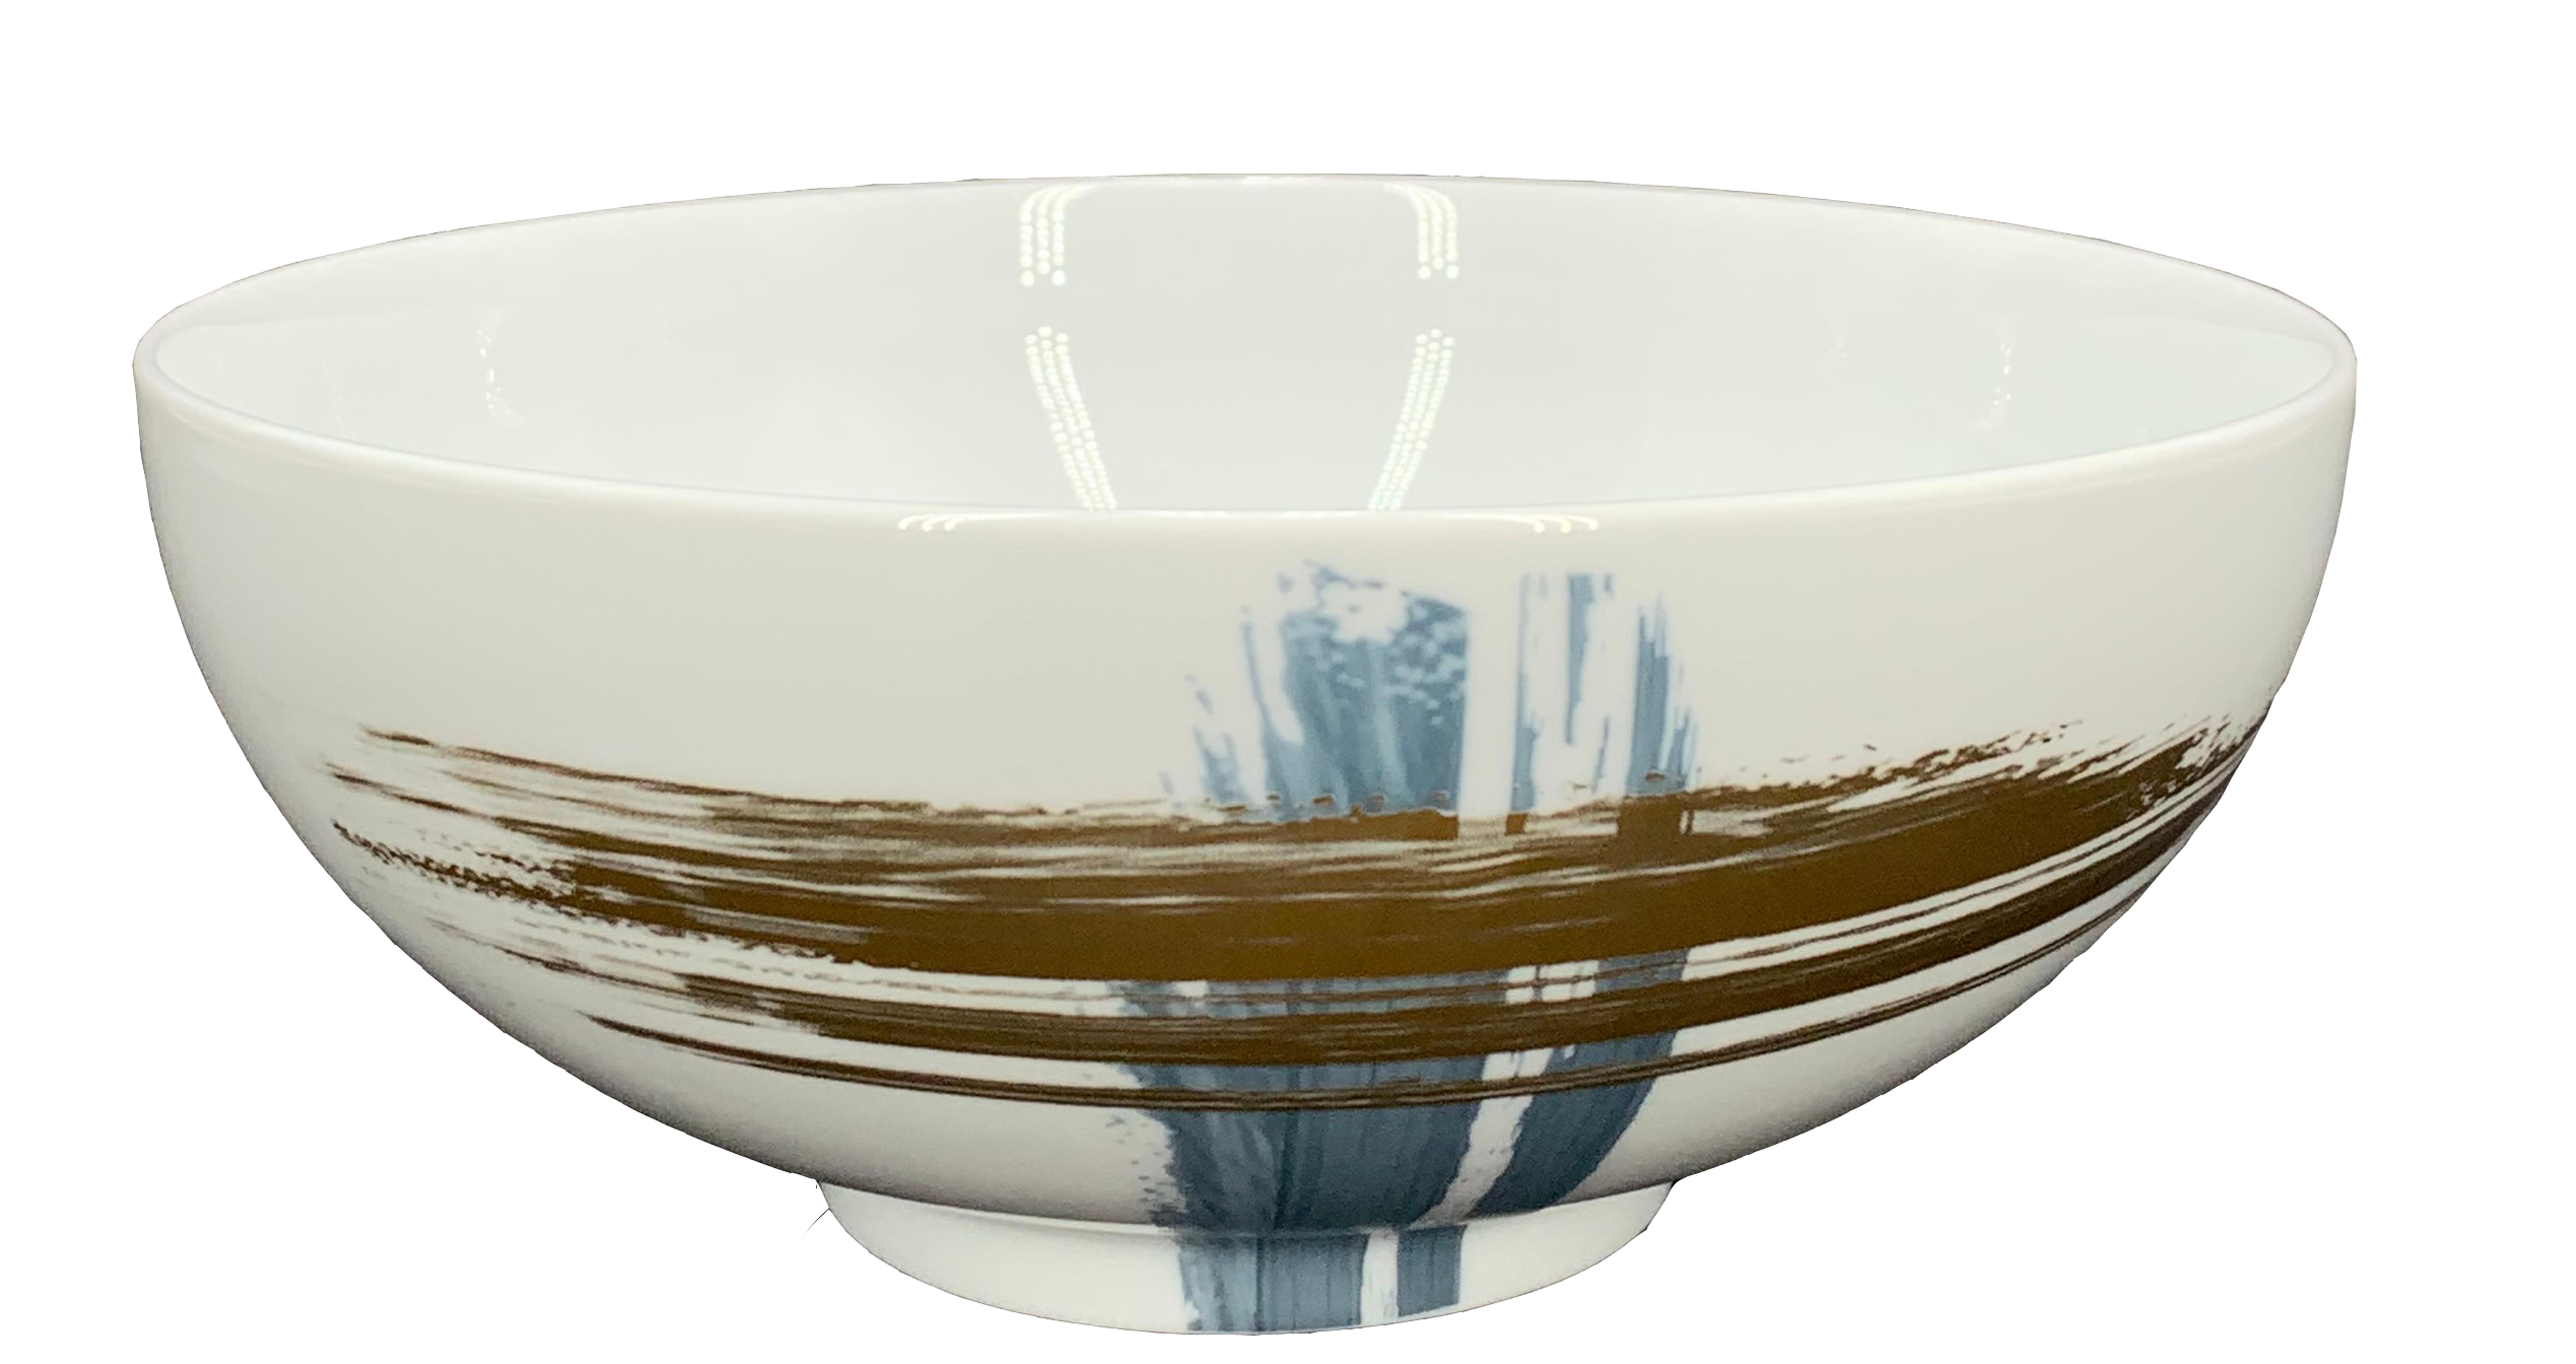 Larger quantities available upon request, with 8 weeks production time.

Description: Large noodle salad bowl (2 pieces)
Color: Blue and gold
Size: 20 Ø x 8.5 H cm, 1300ml
Material: Porcelain and gold
Collection: Artisan Brush